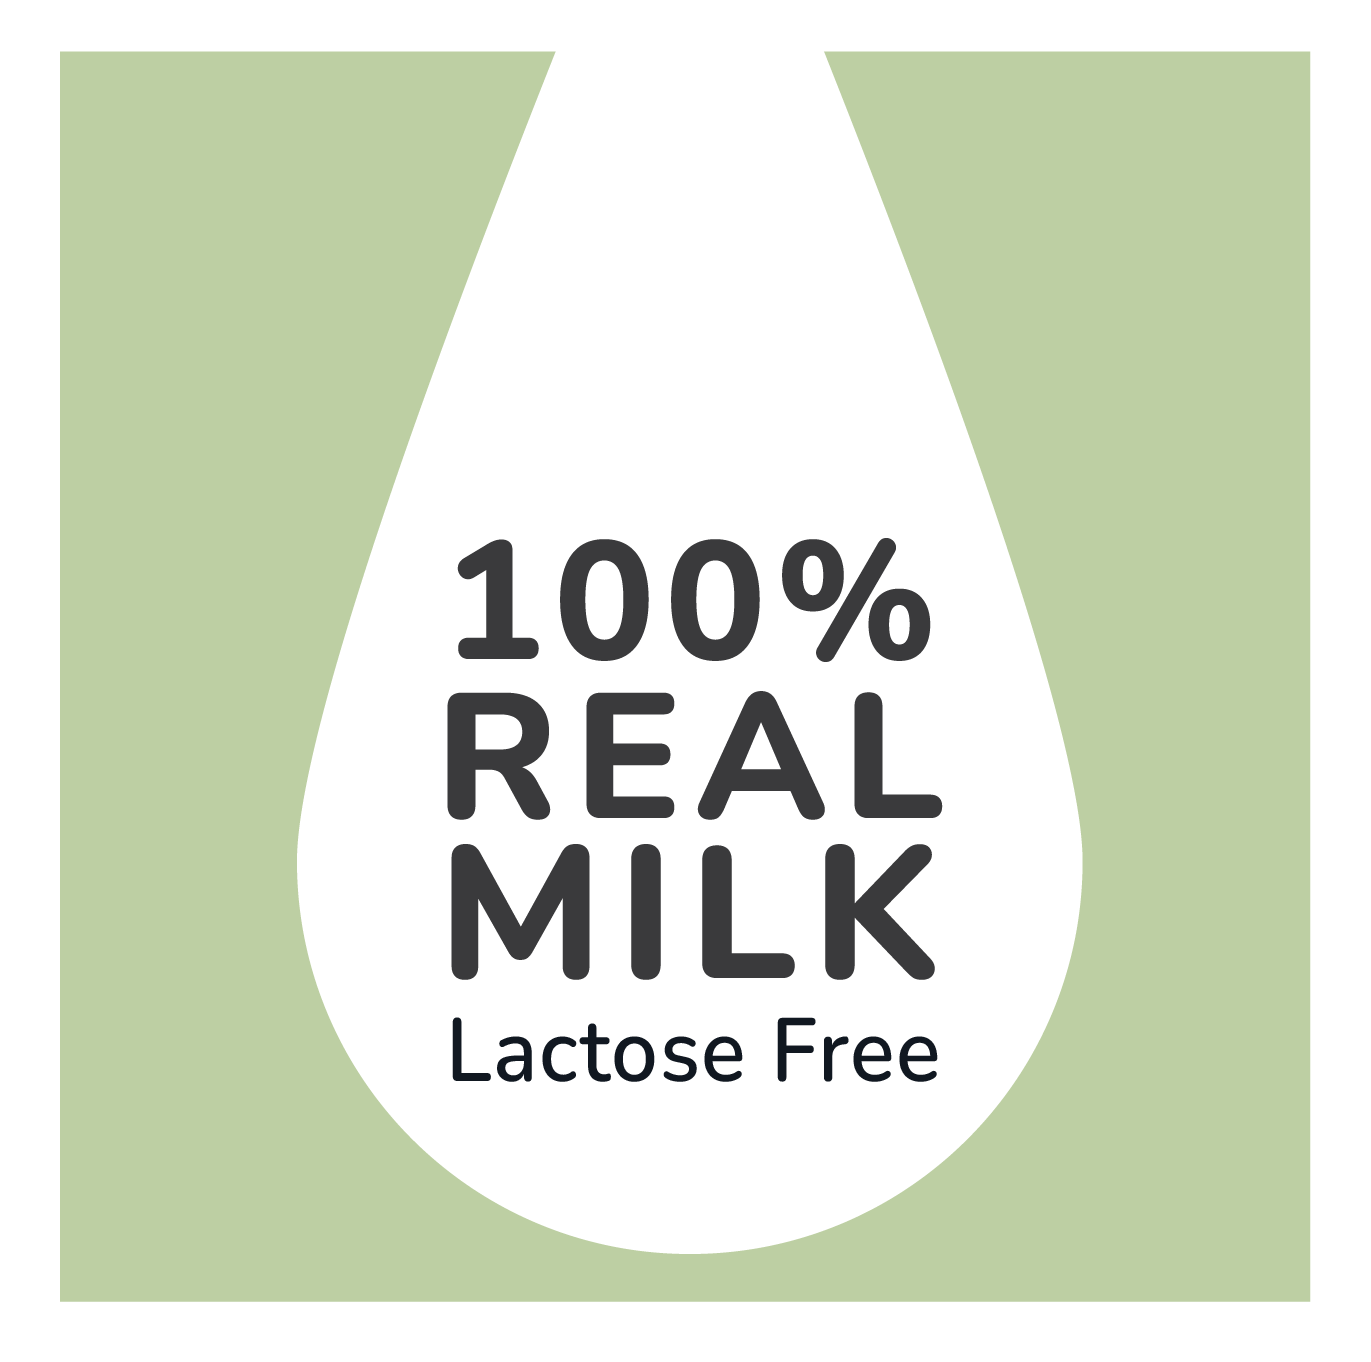 PF_Lactose-Free-Infographic_Green-11